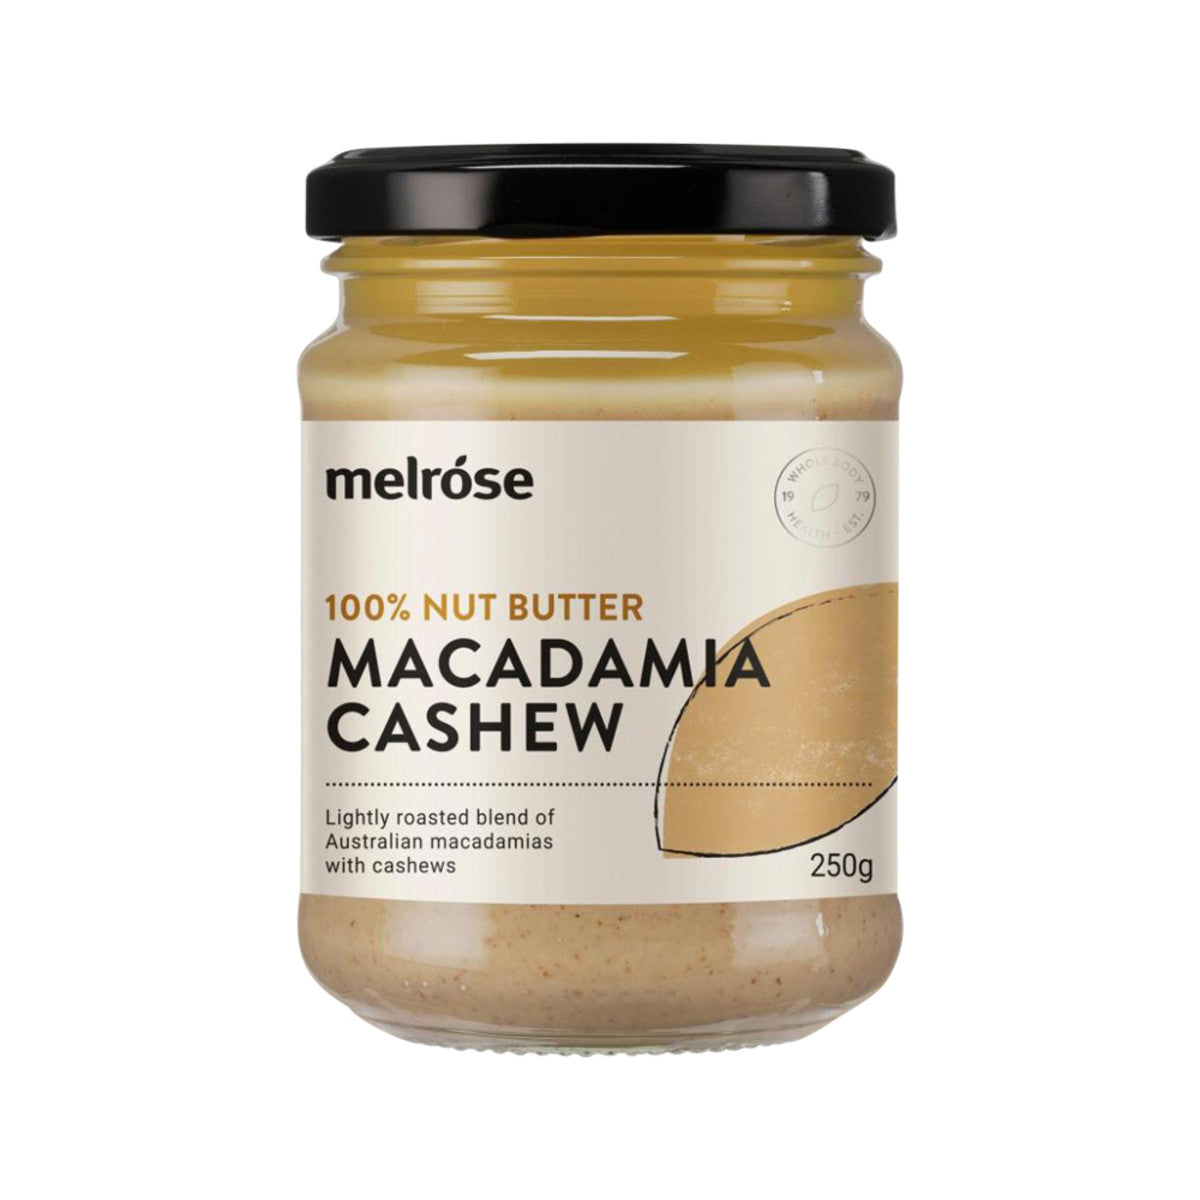 Melrose 100% Nut Butter Macadamia Cashew 250g-The Living Co.